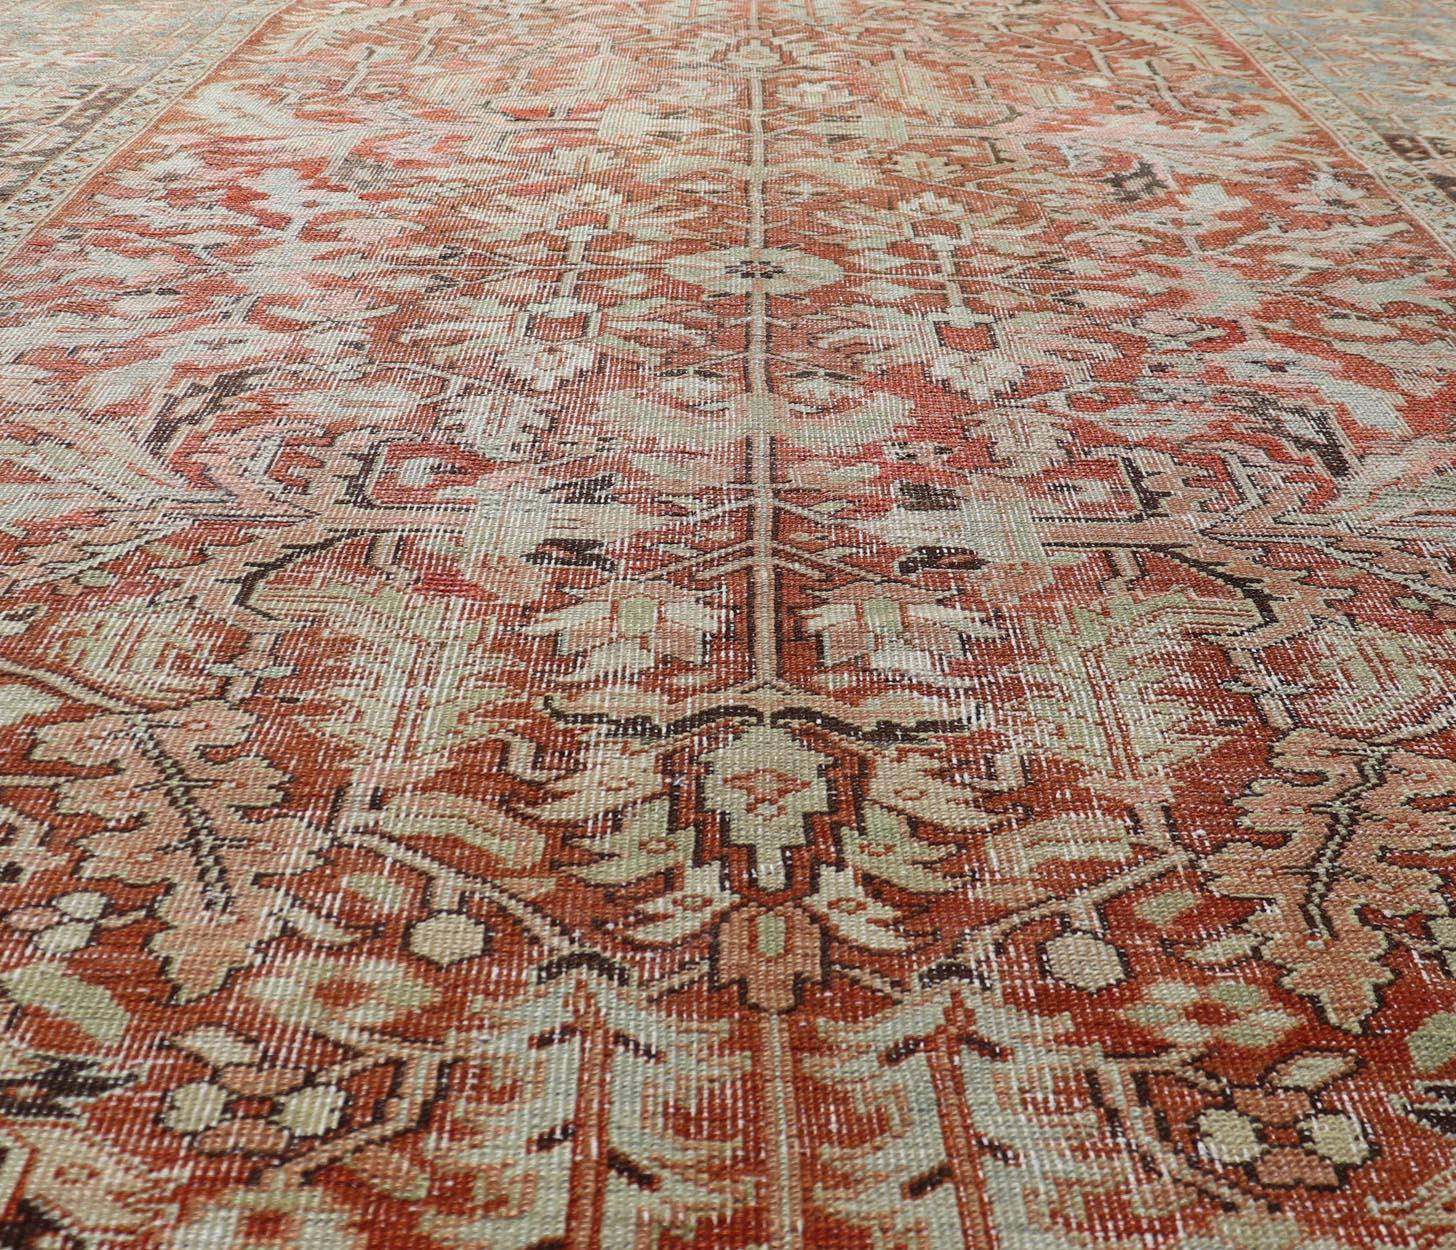 Wool All Over Design Antique Serapi-Heriz Rug With Large Sub Geometric Design For Sale